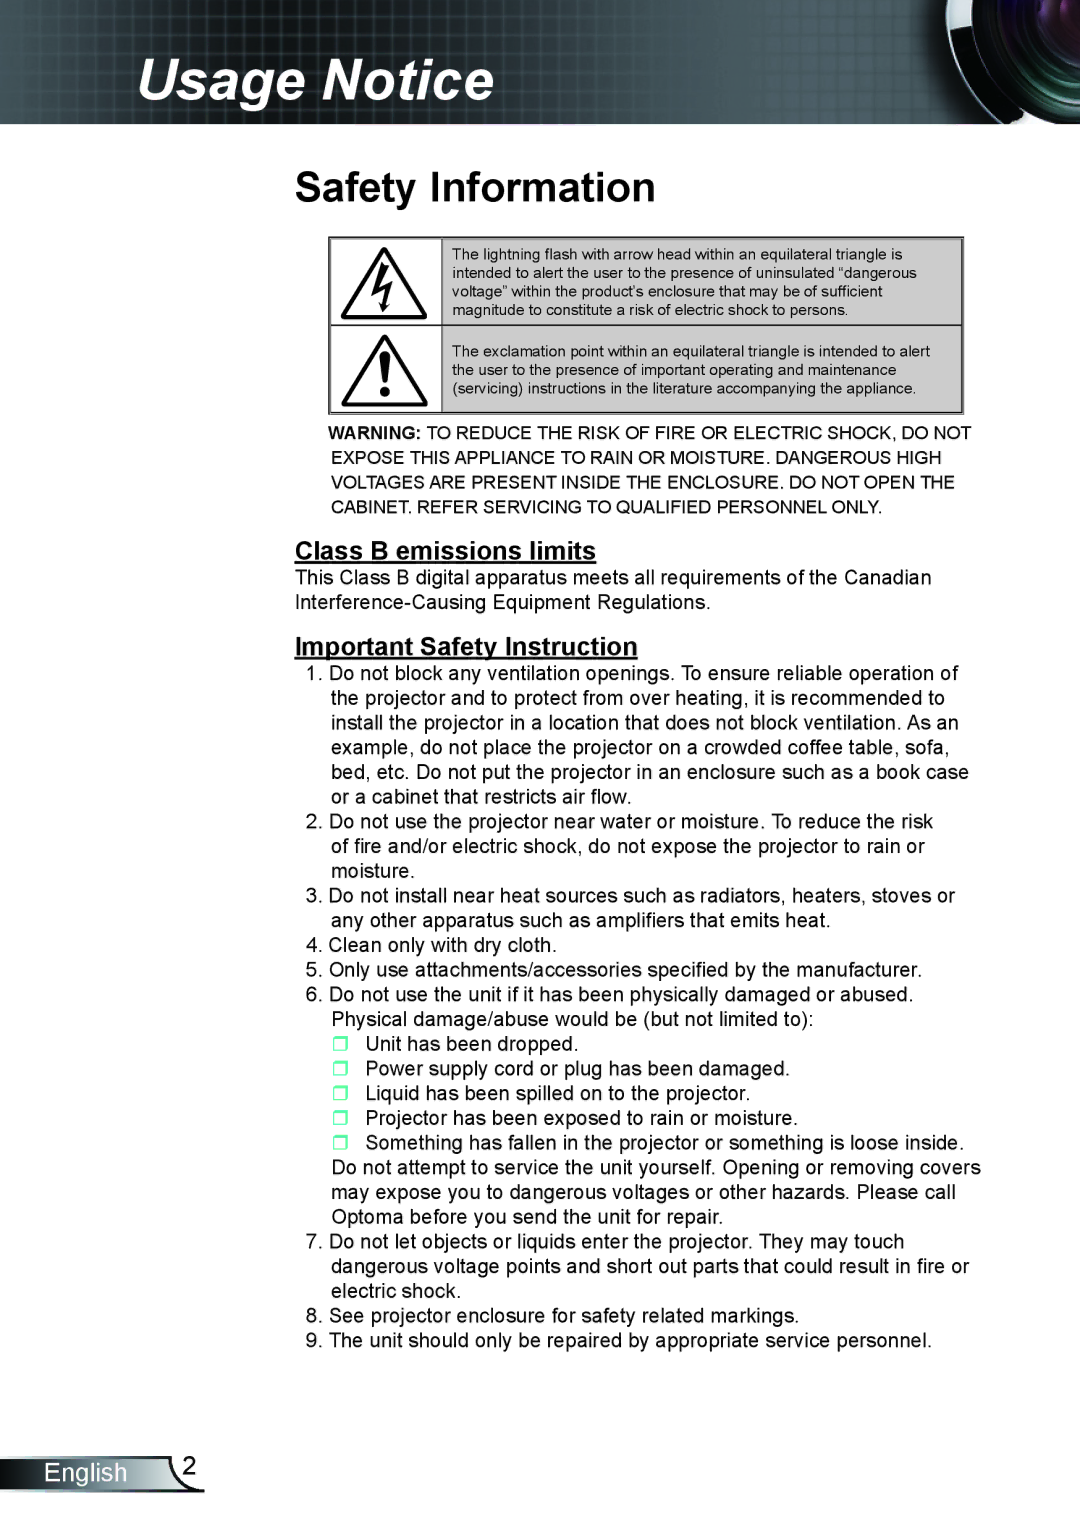 Optoma Technology TH1020 manual Usage Notice, Safety Information 